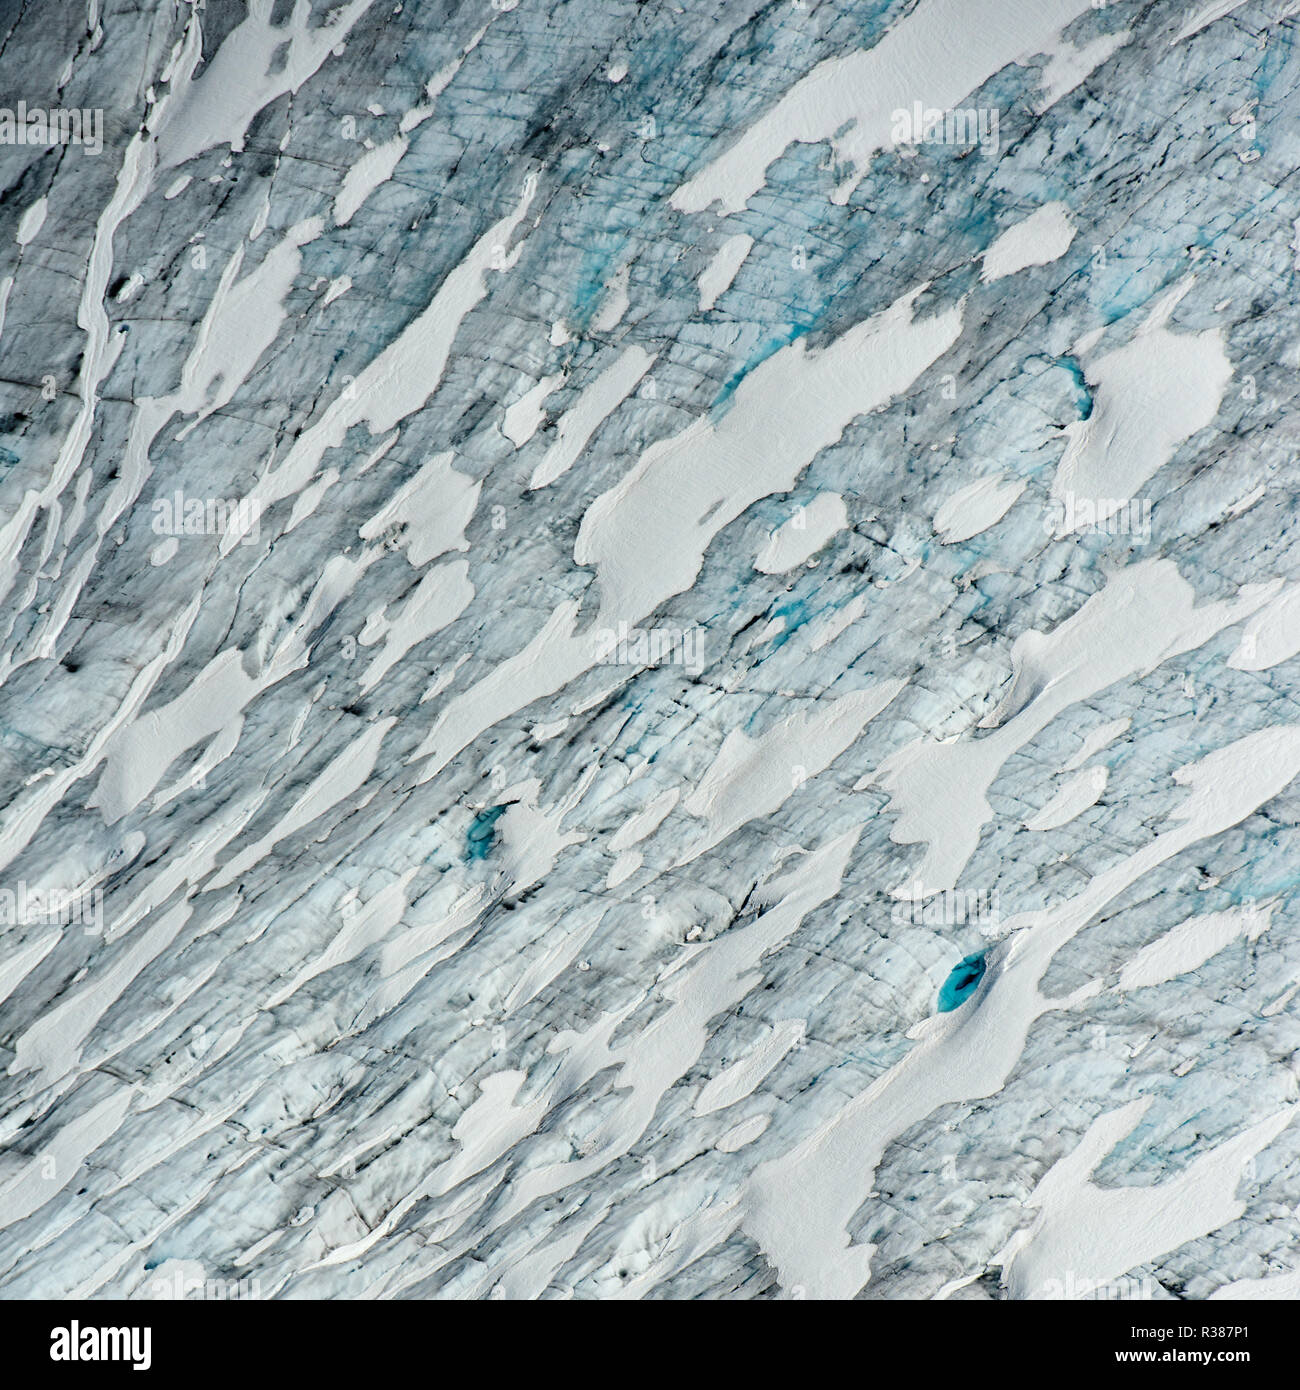 Amazing variations of blue on this aerial image of Tunsbergdalsbreen, Norway's longest glacier arm of the Jostedalsbreen ice cap. Tunsbergdalsbreen is Stock Photo